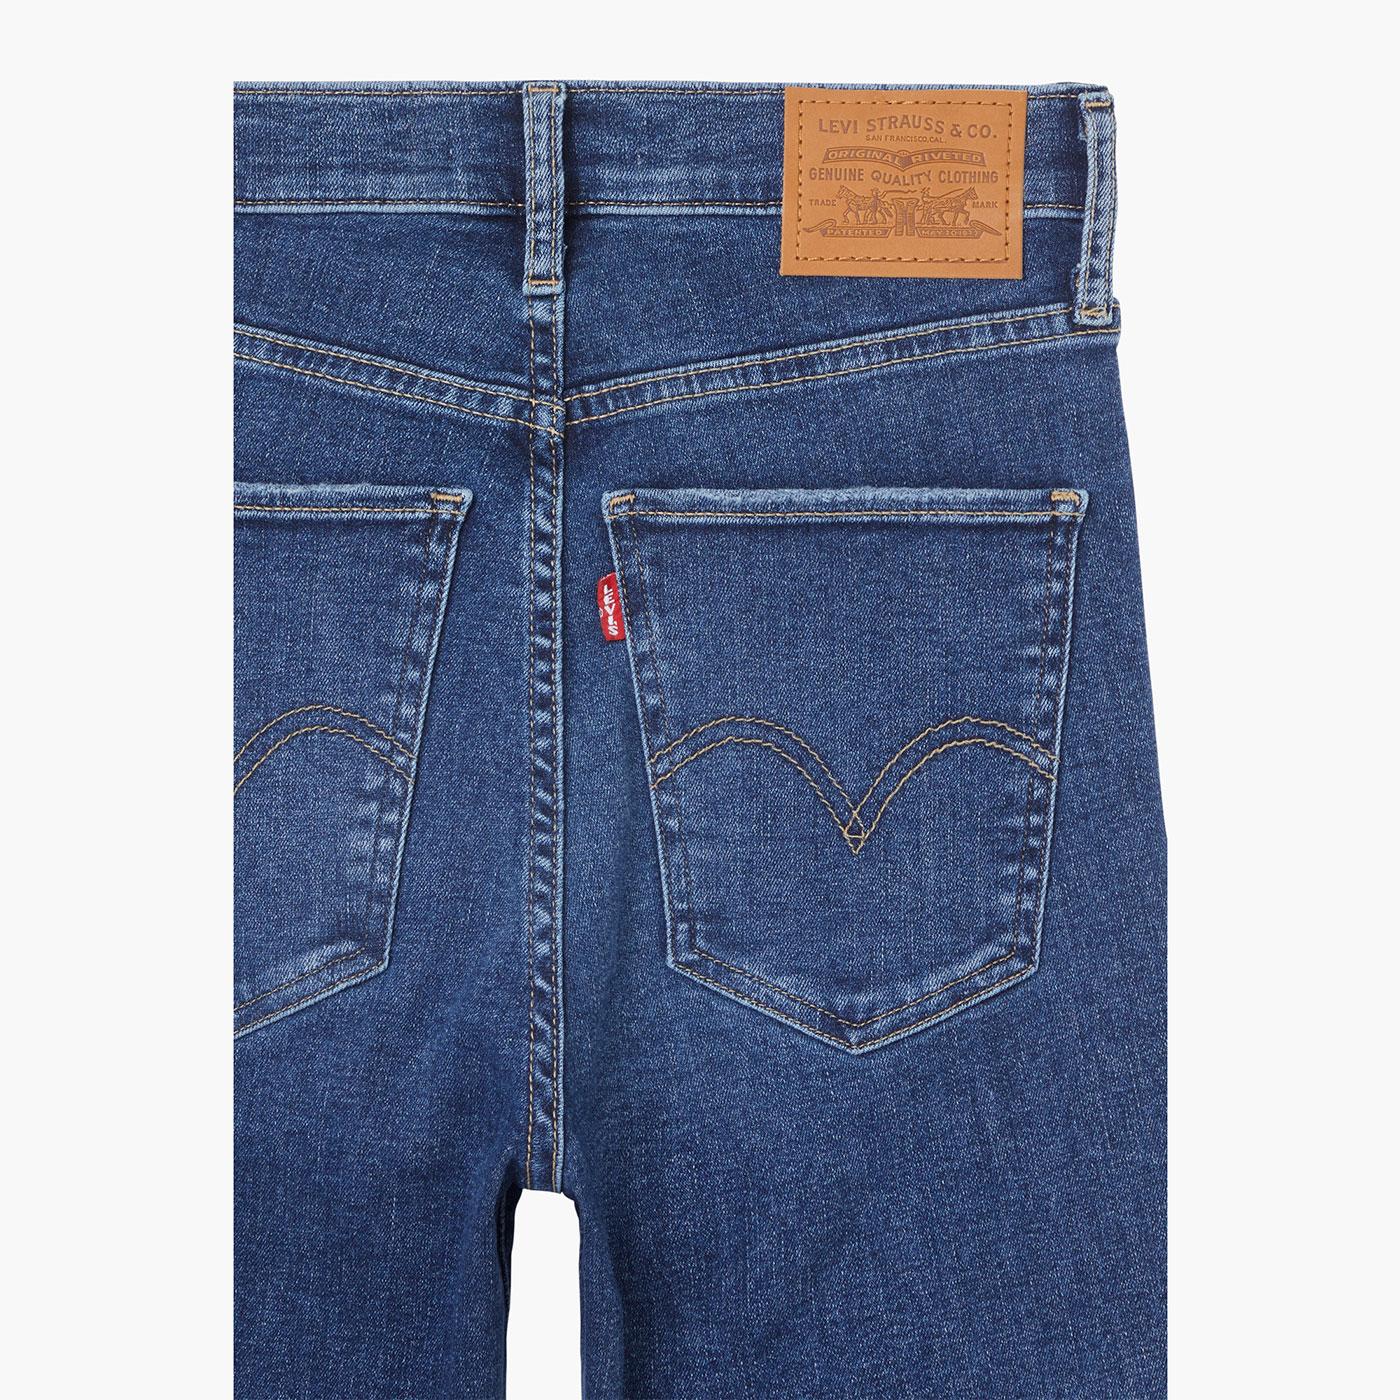 LEVI'S Mile High Super Skinny Jeans in Venice For Real